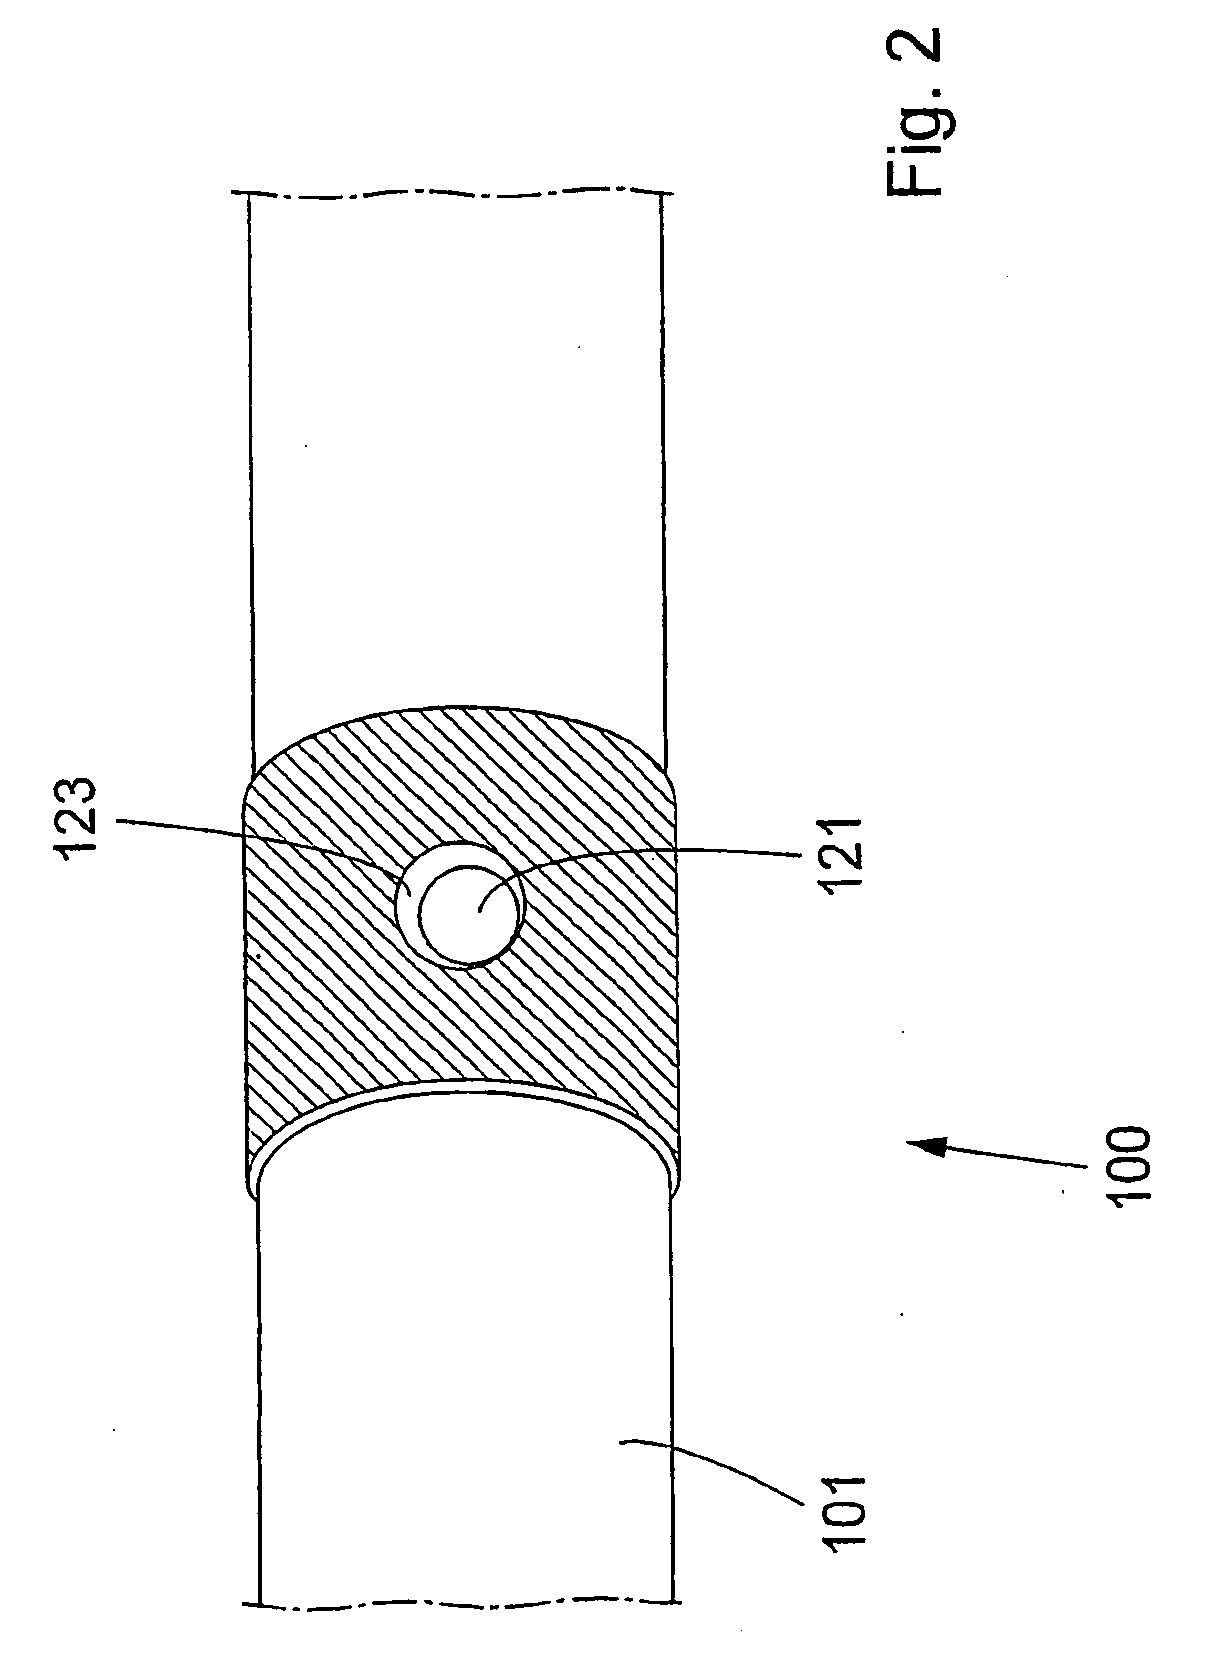 Device for Invasive Use